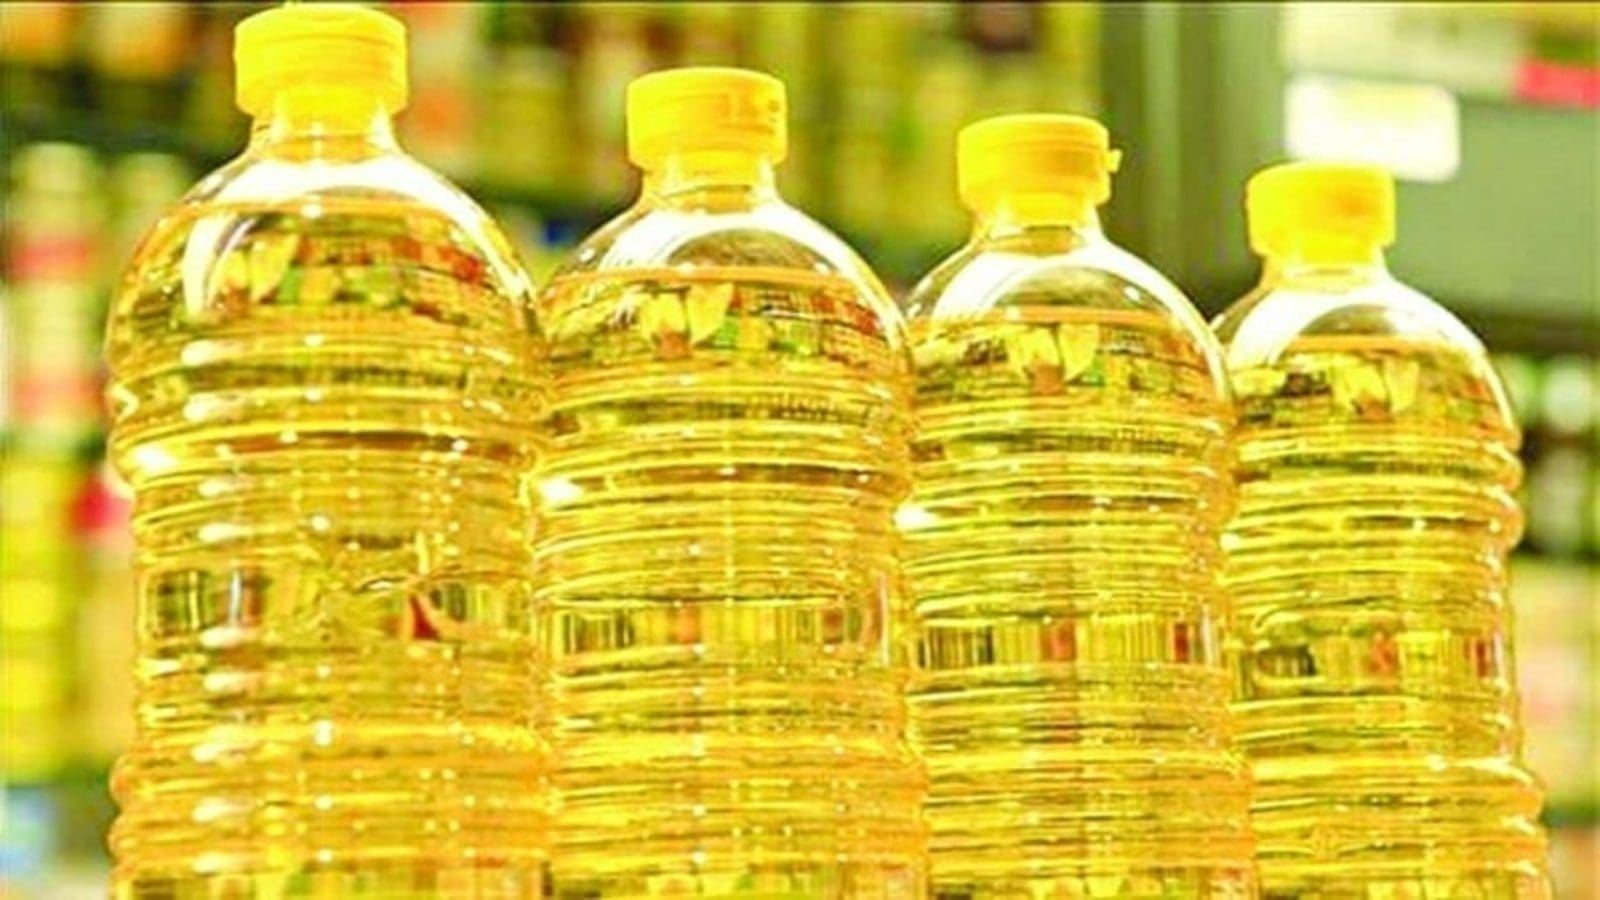 Norfund invests US$21M in SAMANU to boost edible oils production in Ethiopia